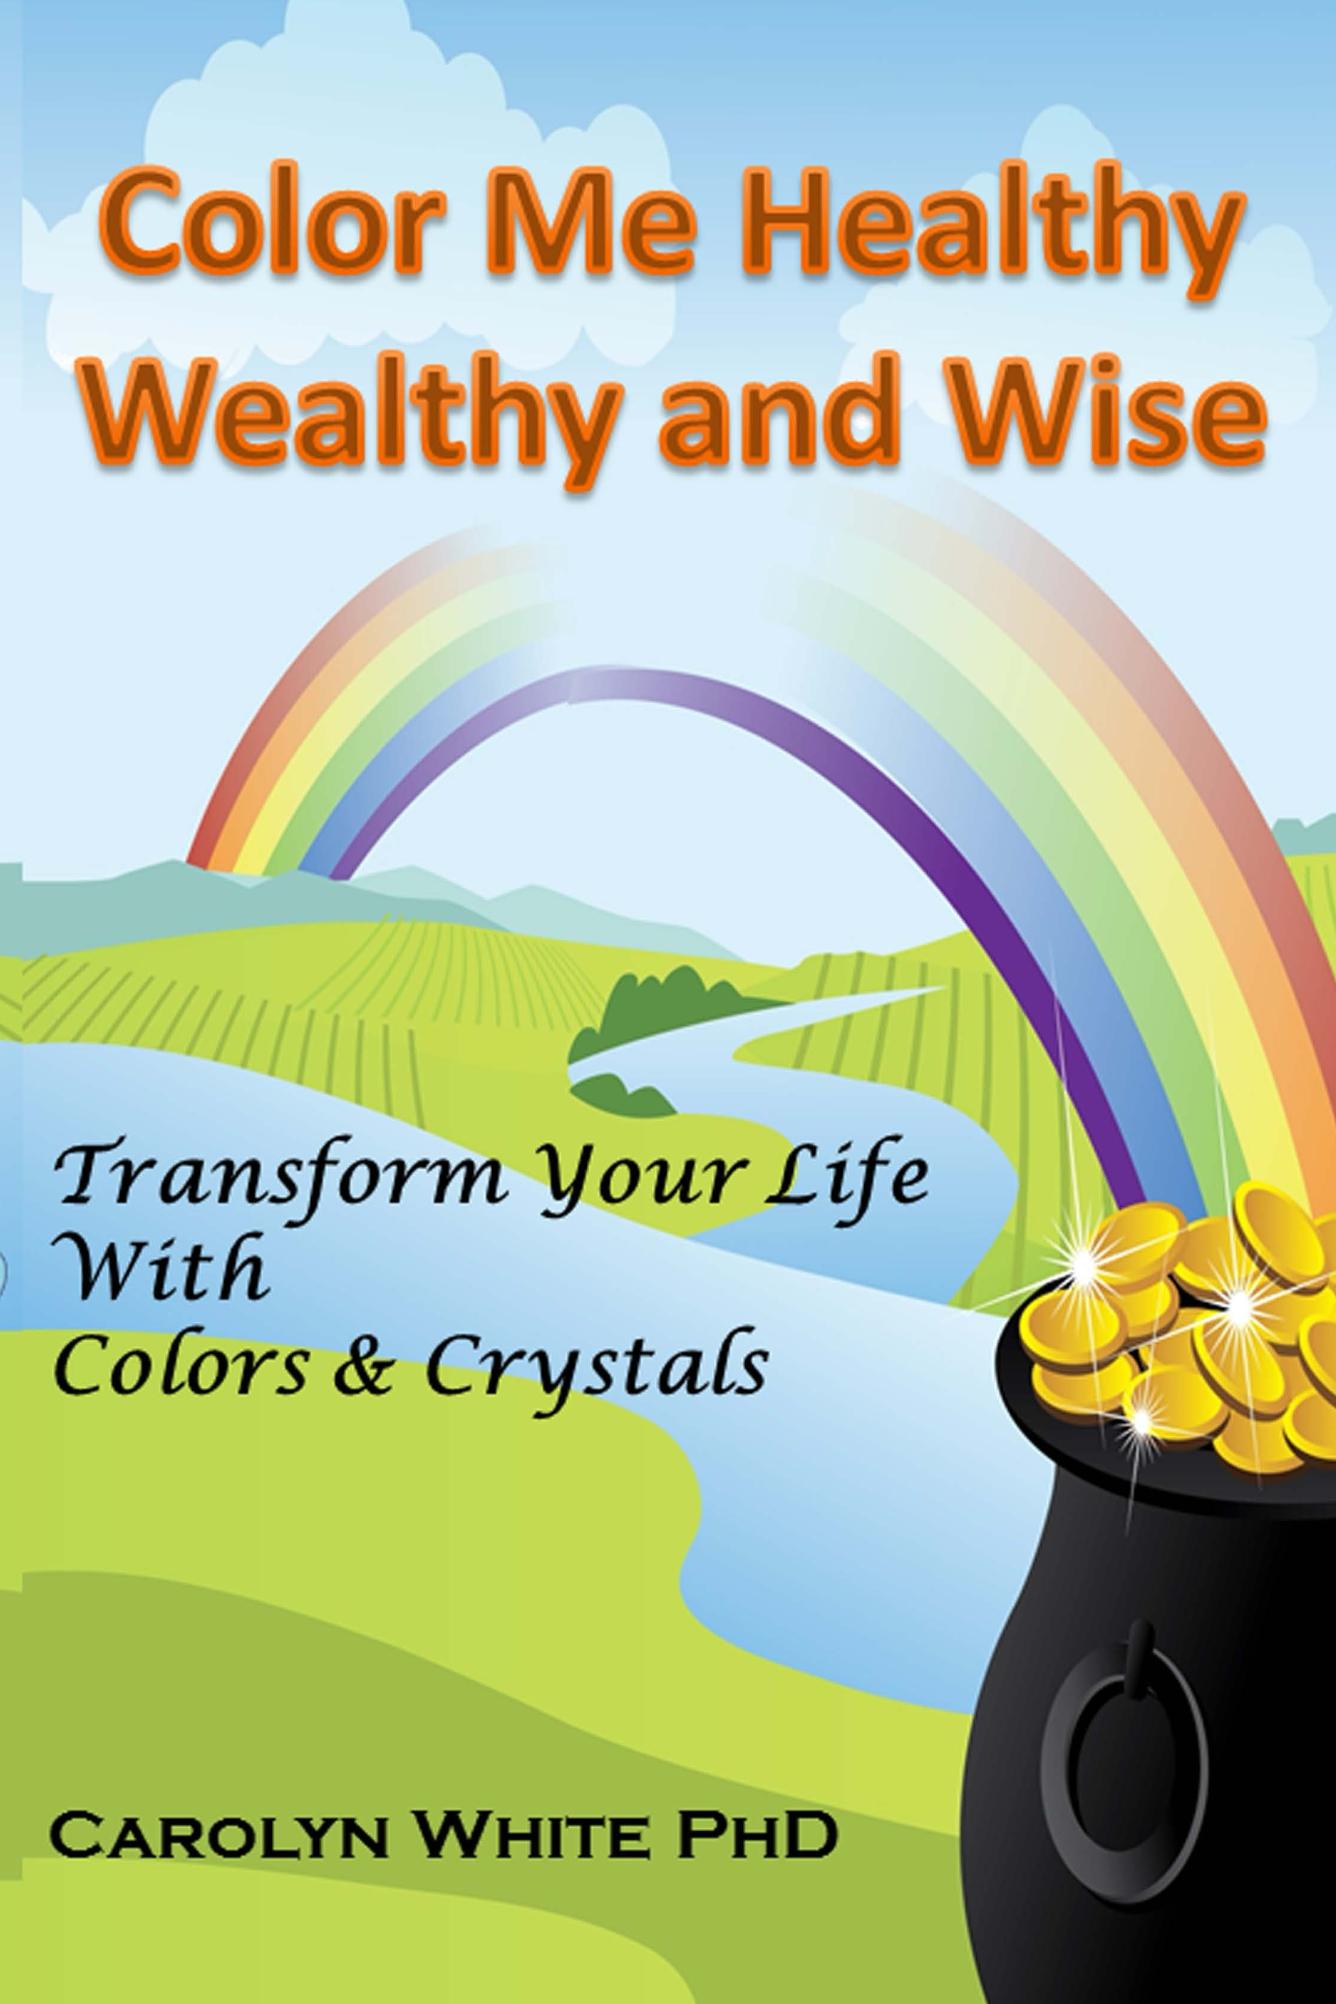 Color Me Healthy Wealthy and Wise Transform Your Life with Colors & Crystals